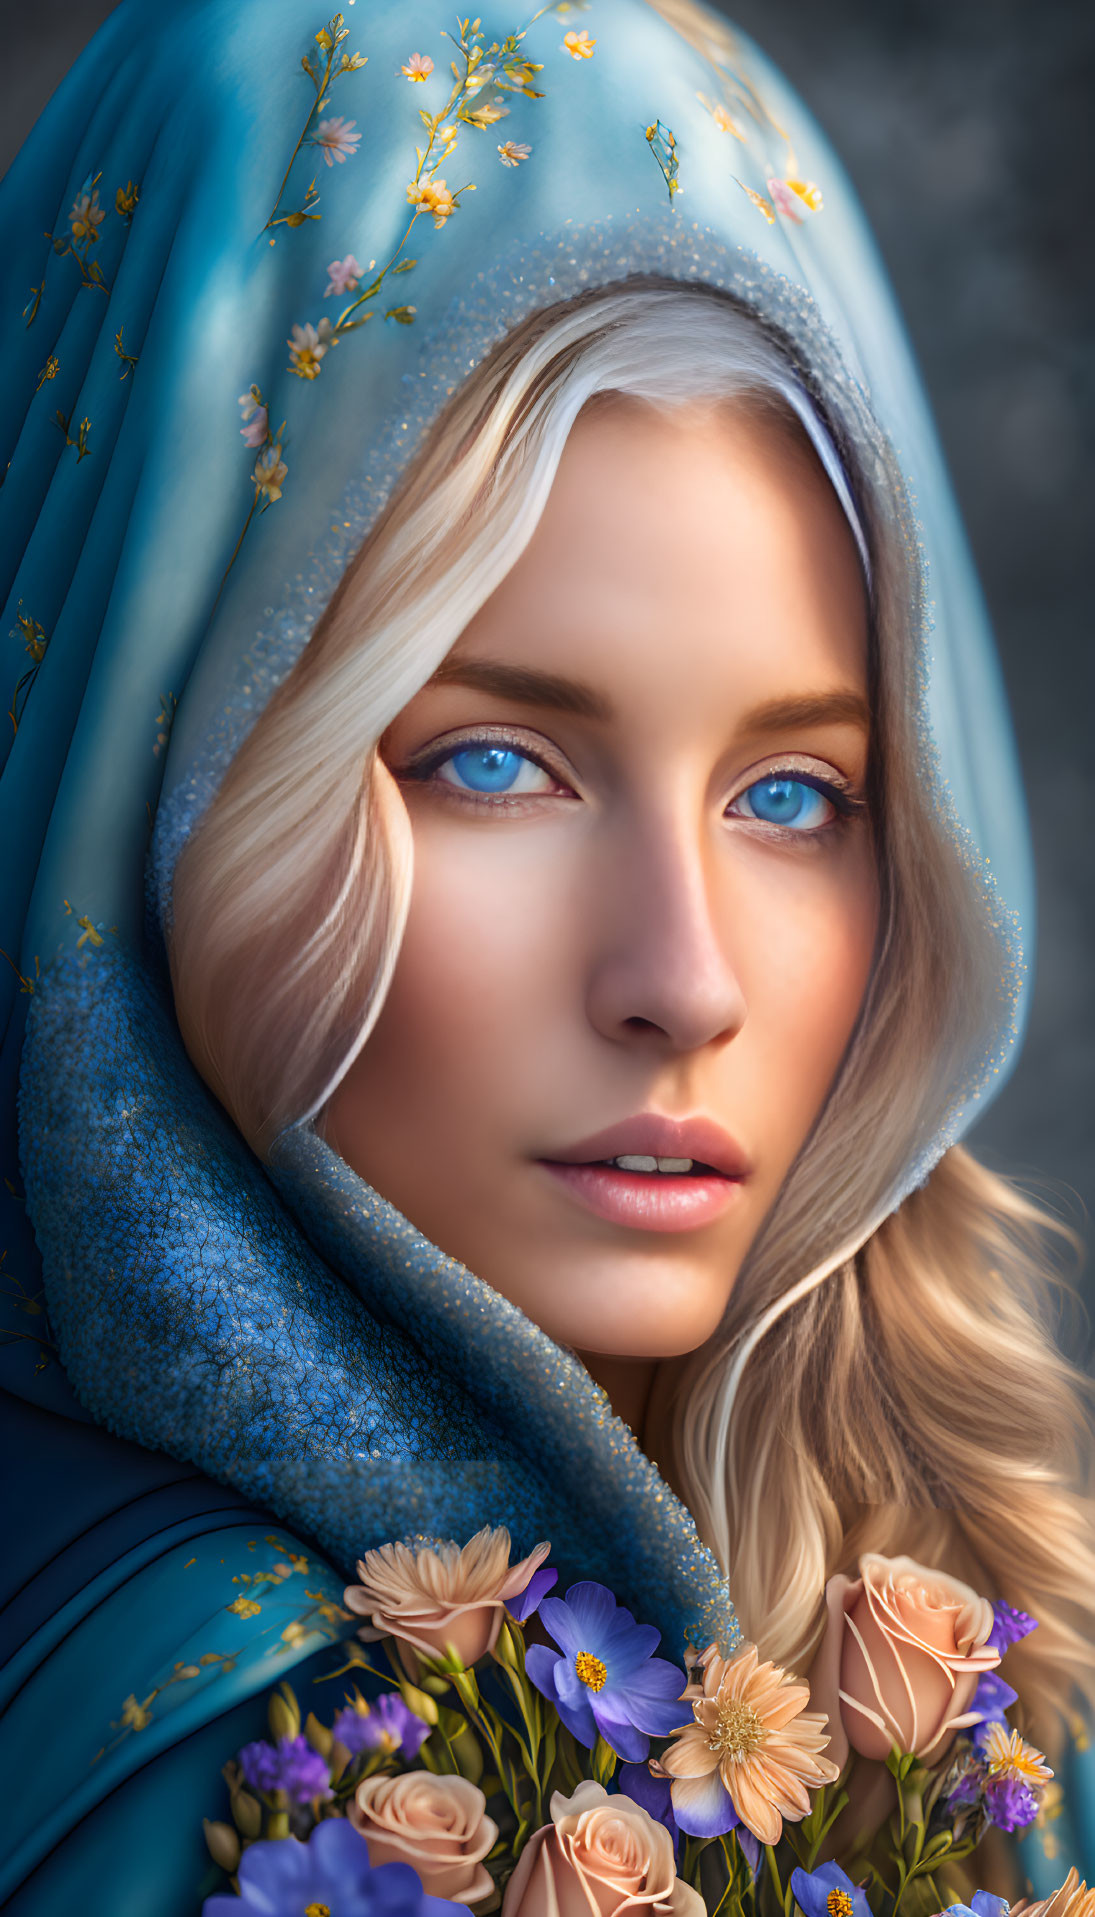 Digital portrait of woman with blue eyes in embroidered blue hood among flowers